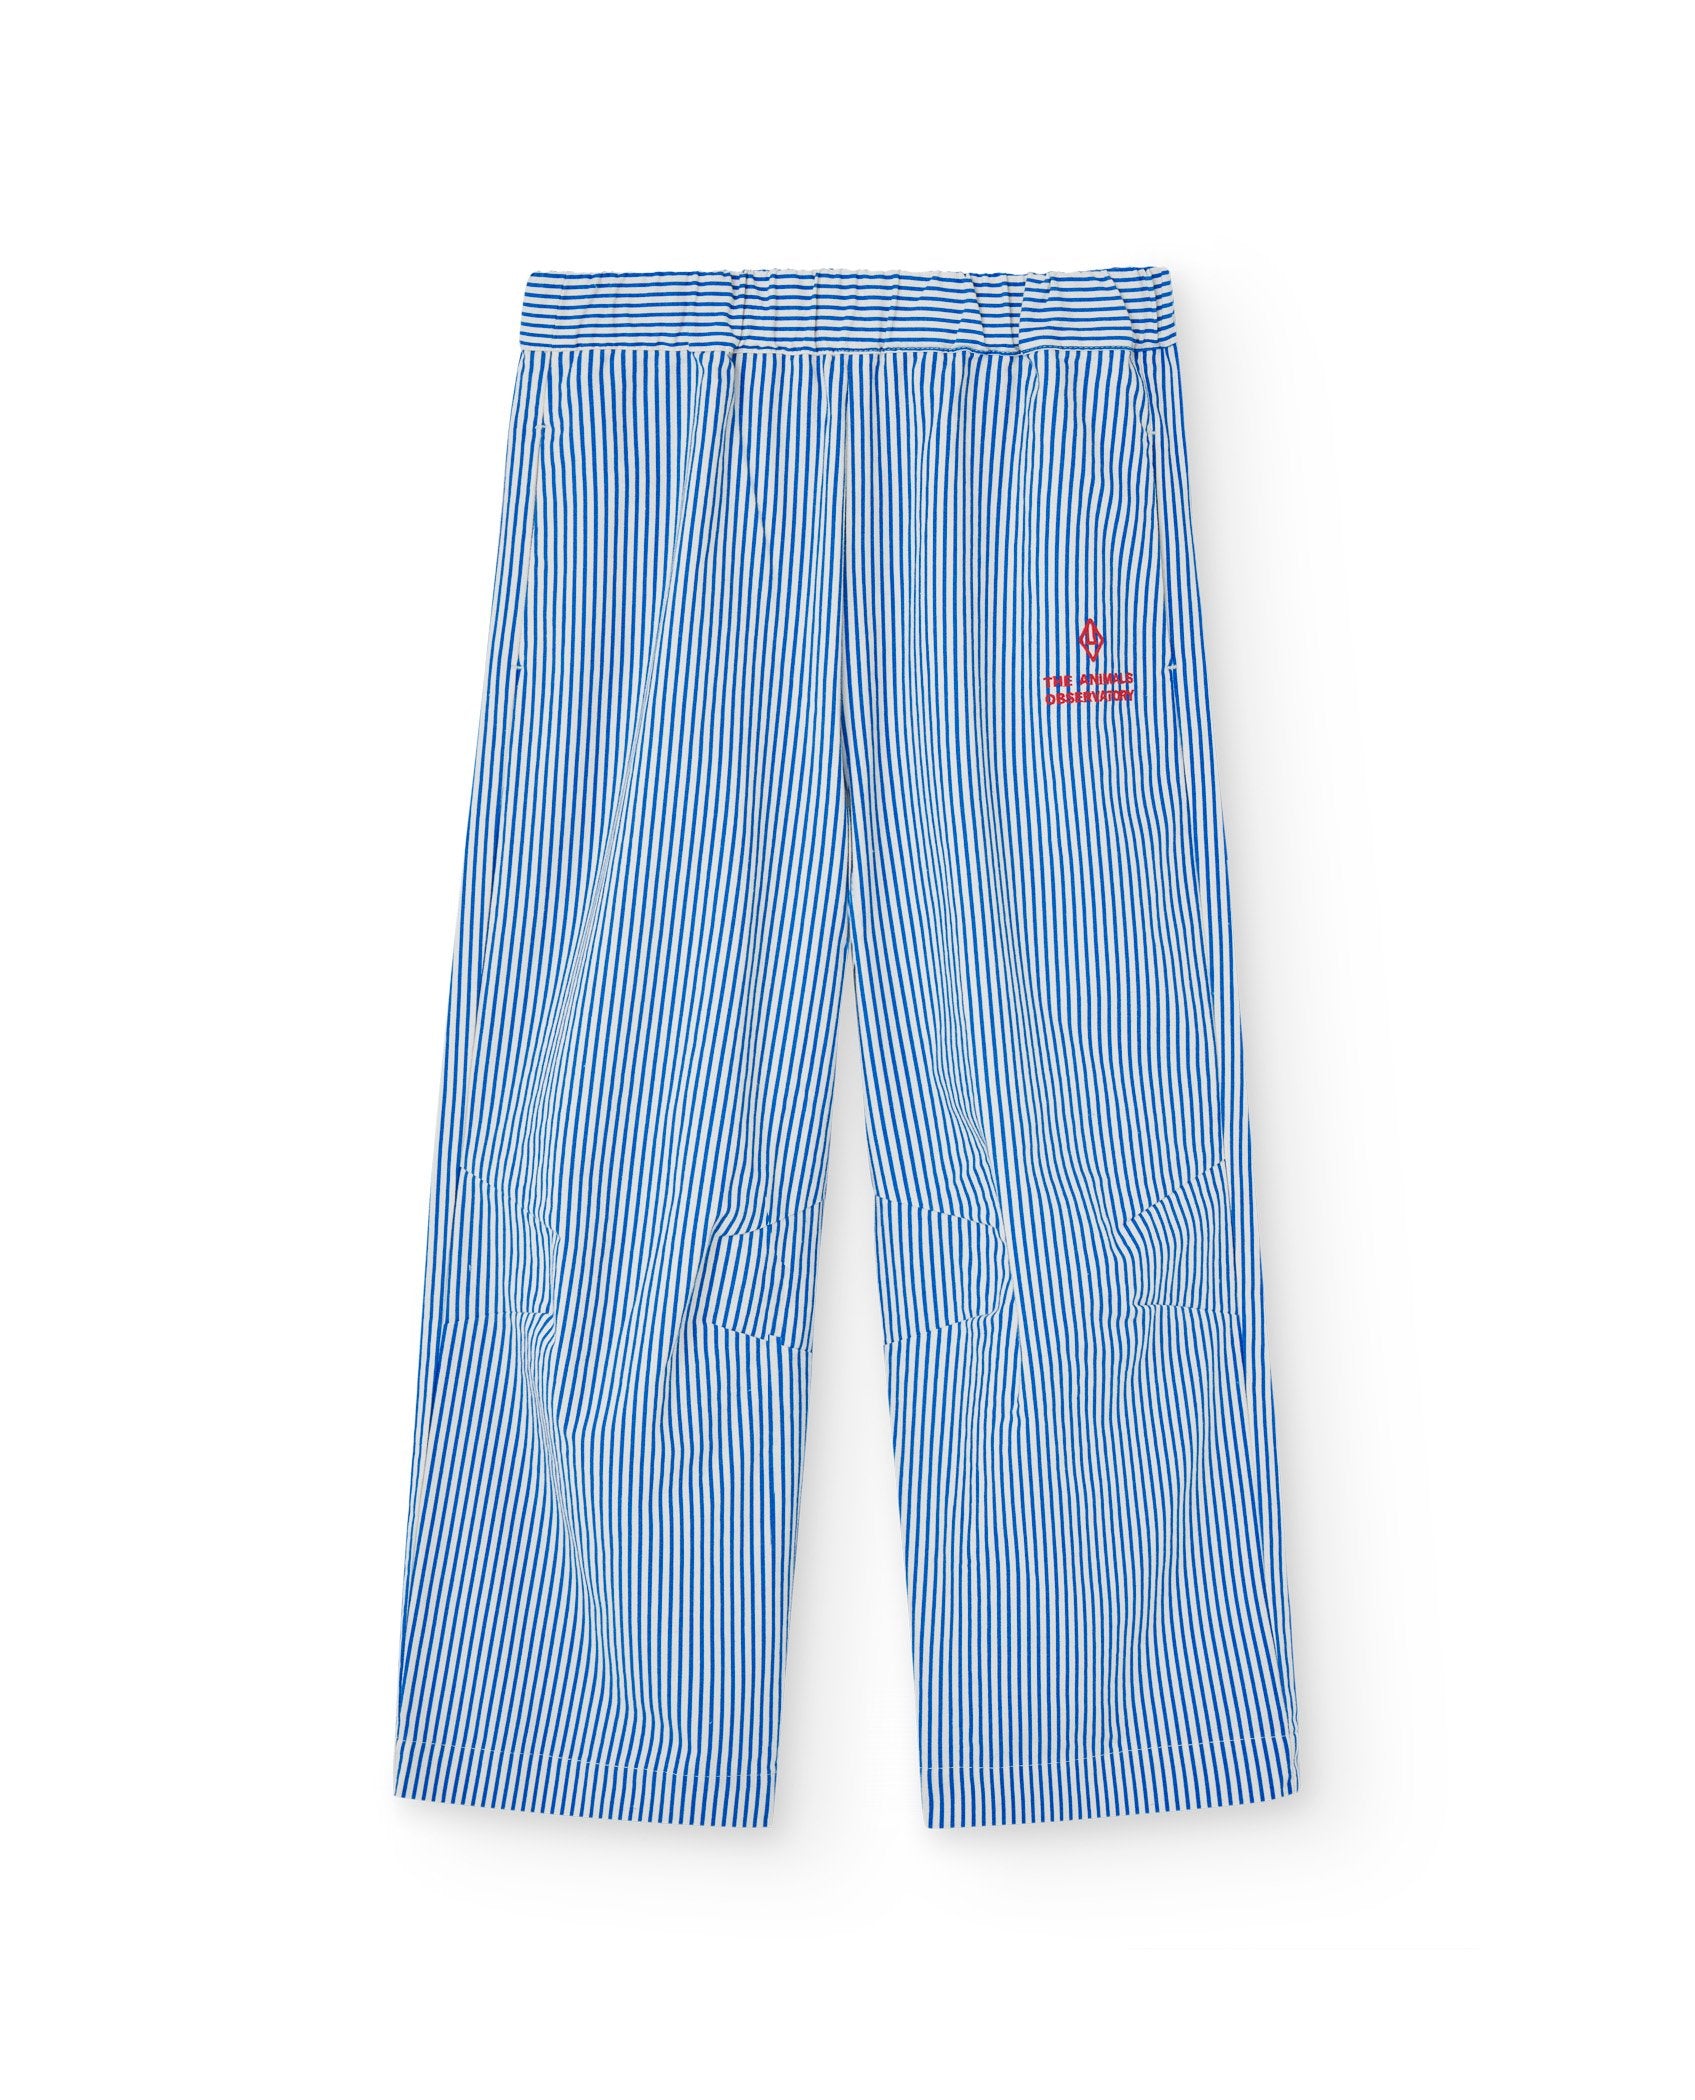 Stripped Elephant Pants PRODUCT FRONT